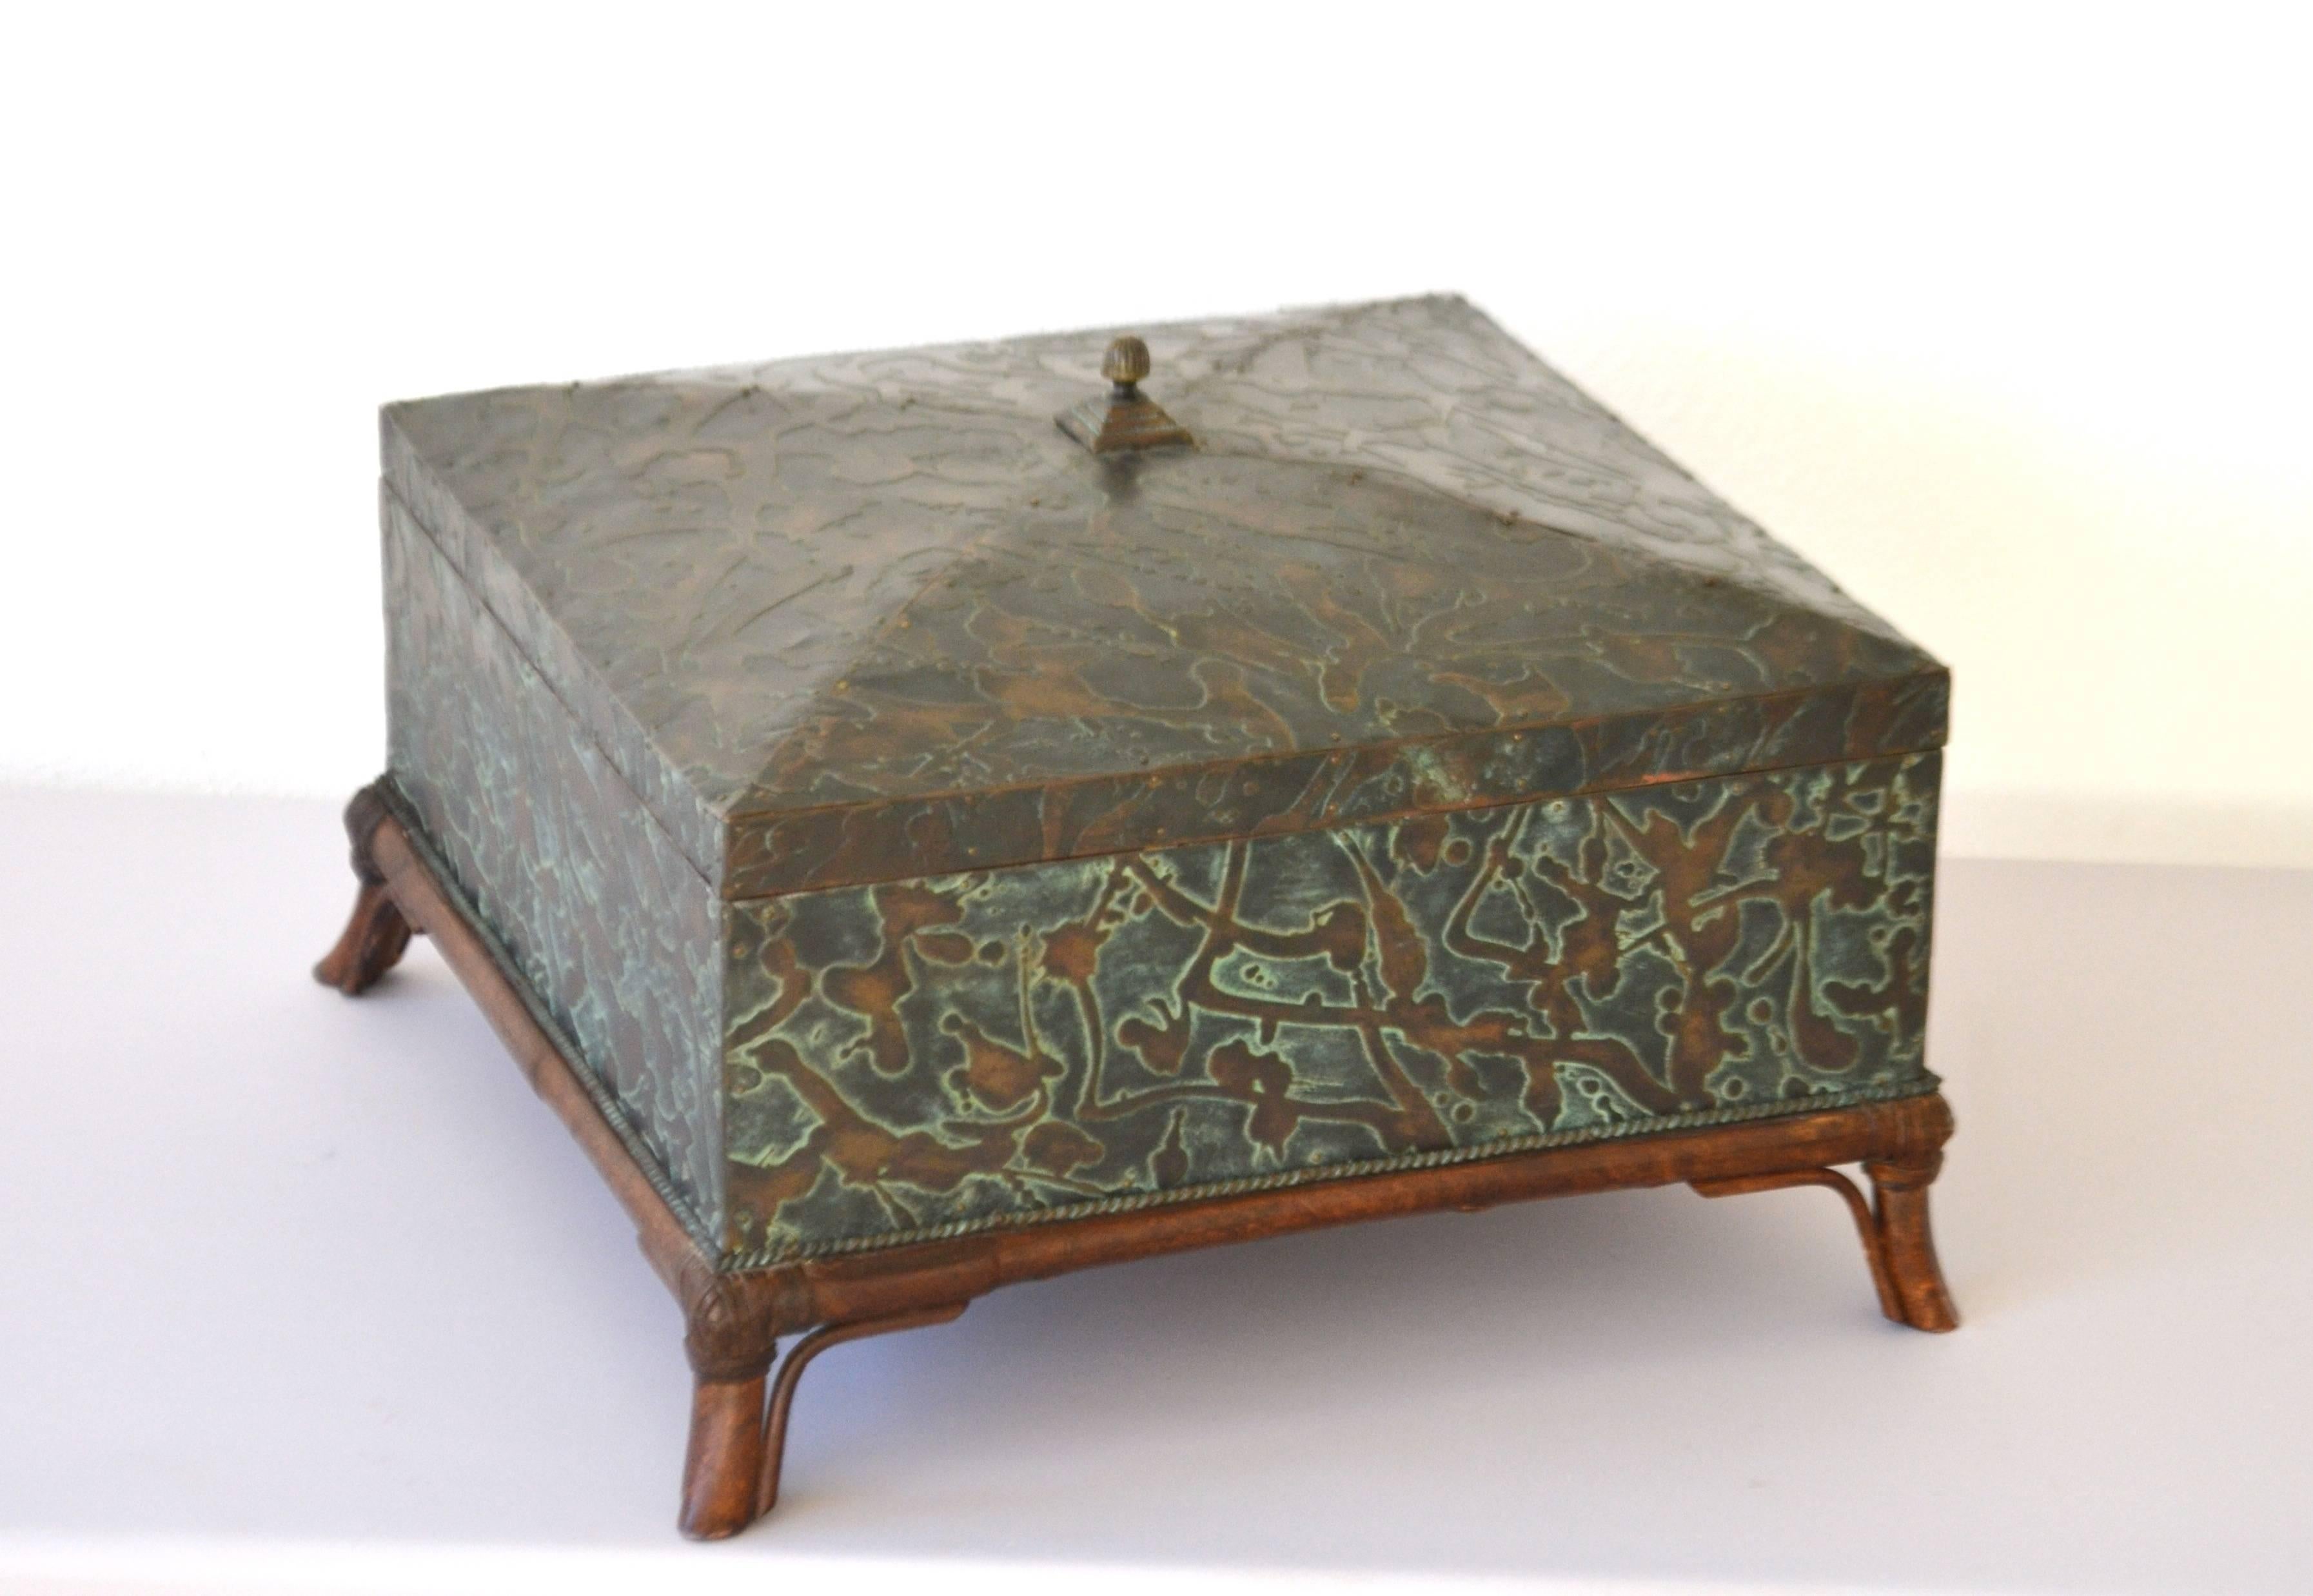 Stunning Post-Modern etched brass box by Maitland-Smith, circa 1970s-1980s. This custom artisan crafted glamorous decorative box is designed with a hinged lid, upholstered velvet interior and mounted on a rattan base.
Measurements:
Exterior: 17.5